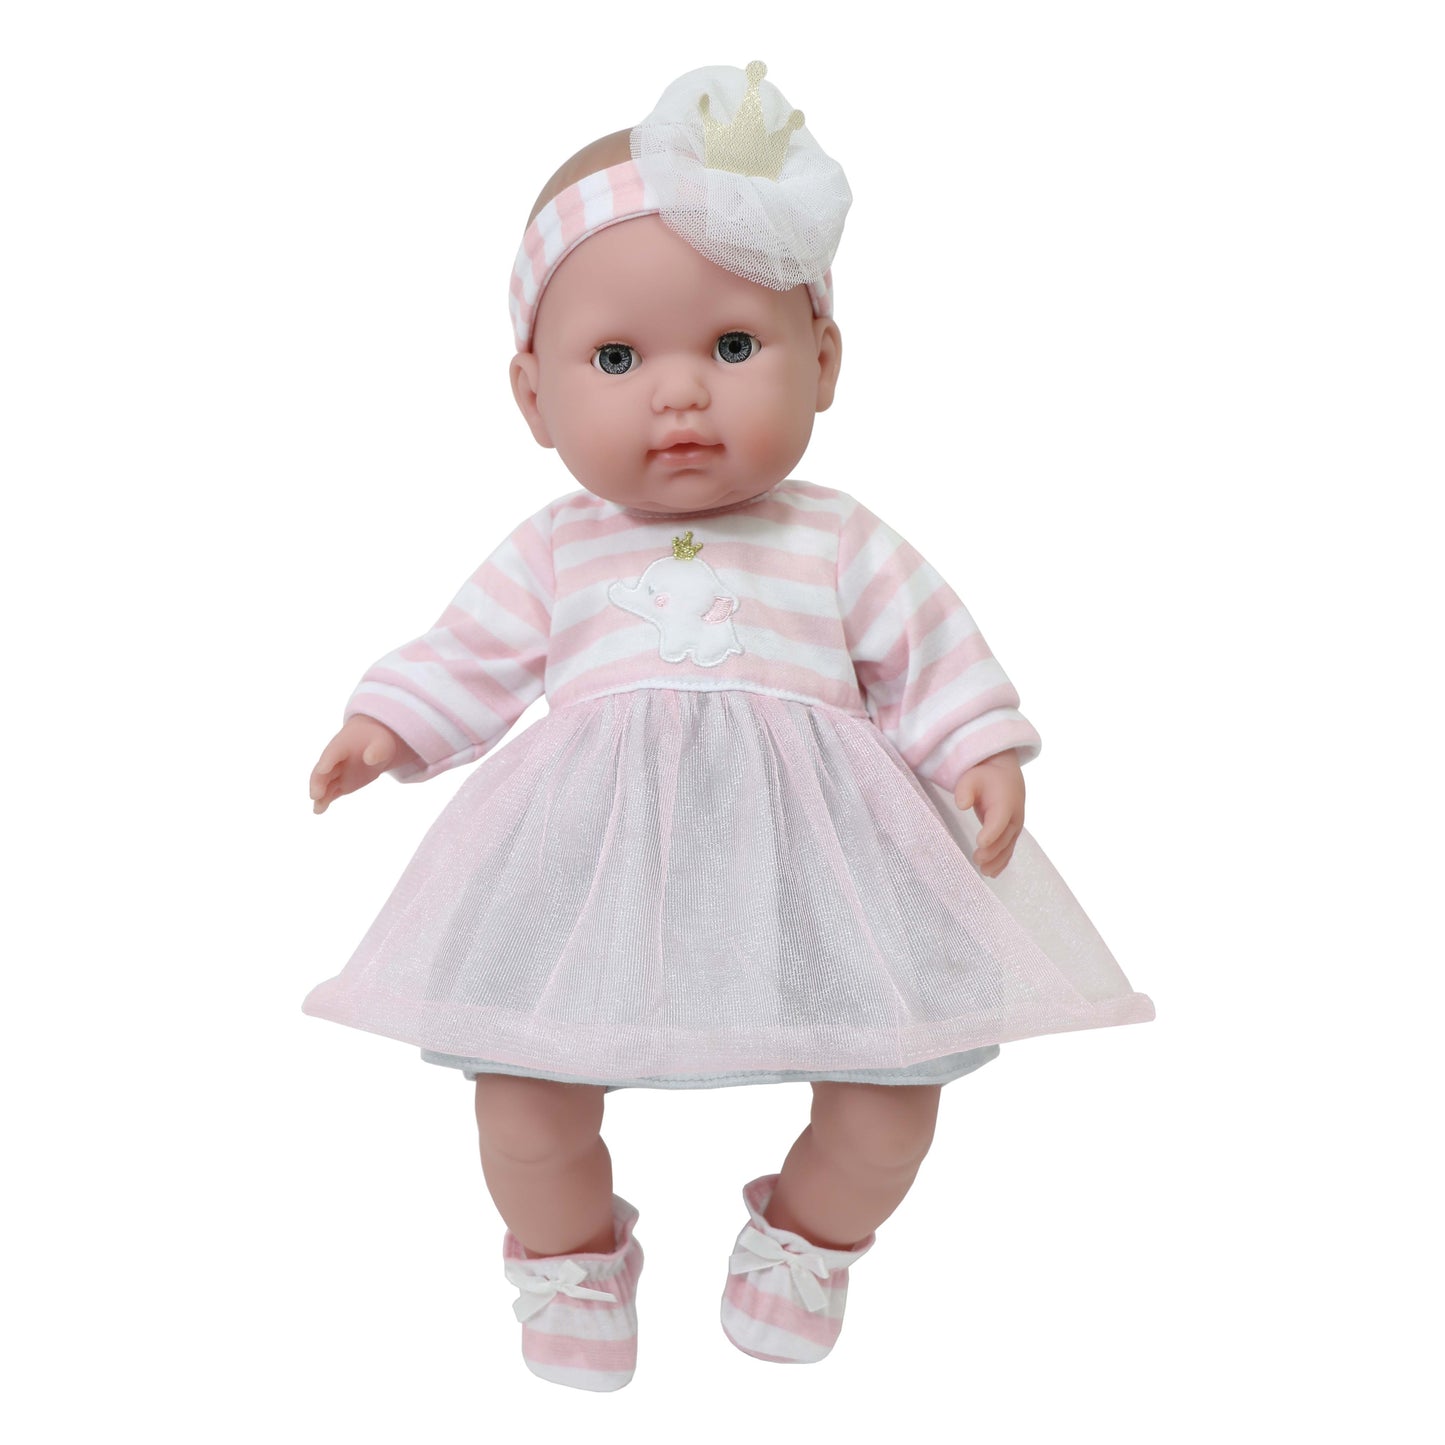 JC Toys Berenguer Boutique Baby Doll Outfit Pink Striped Dress with Tulle Skirt, Shorts, Headband, and Booties